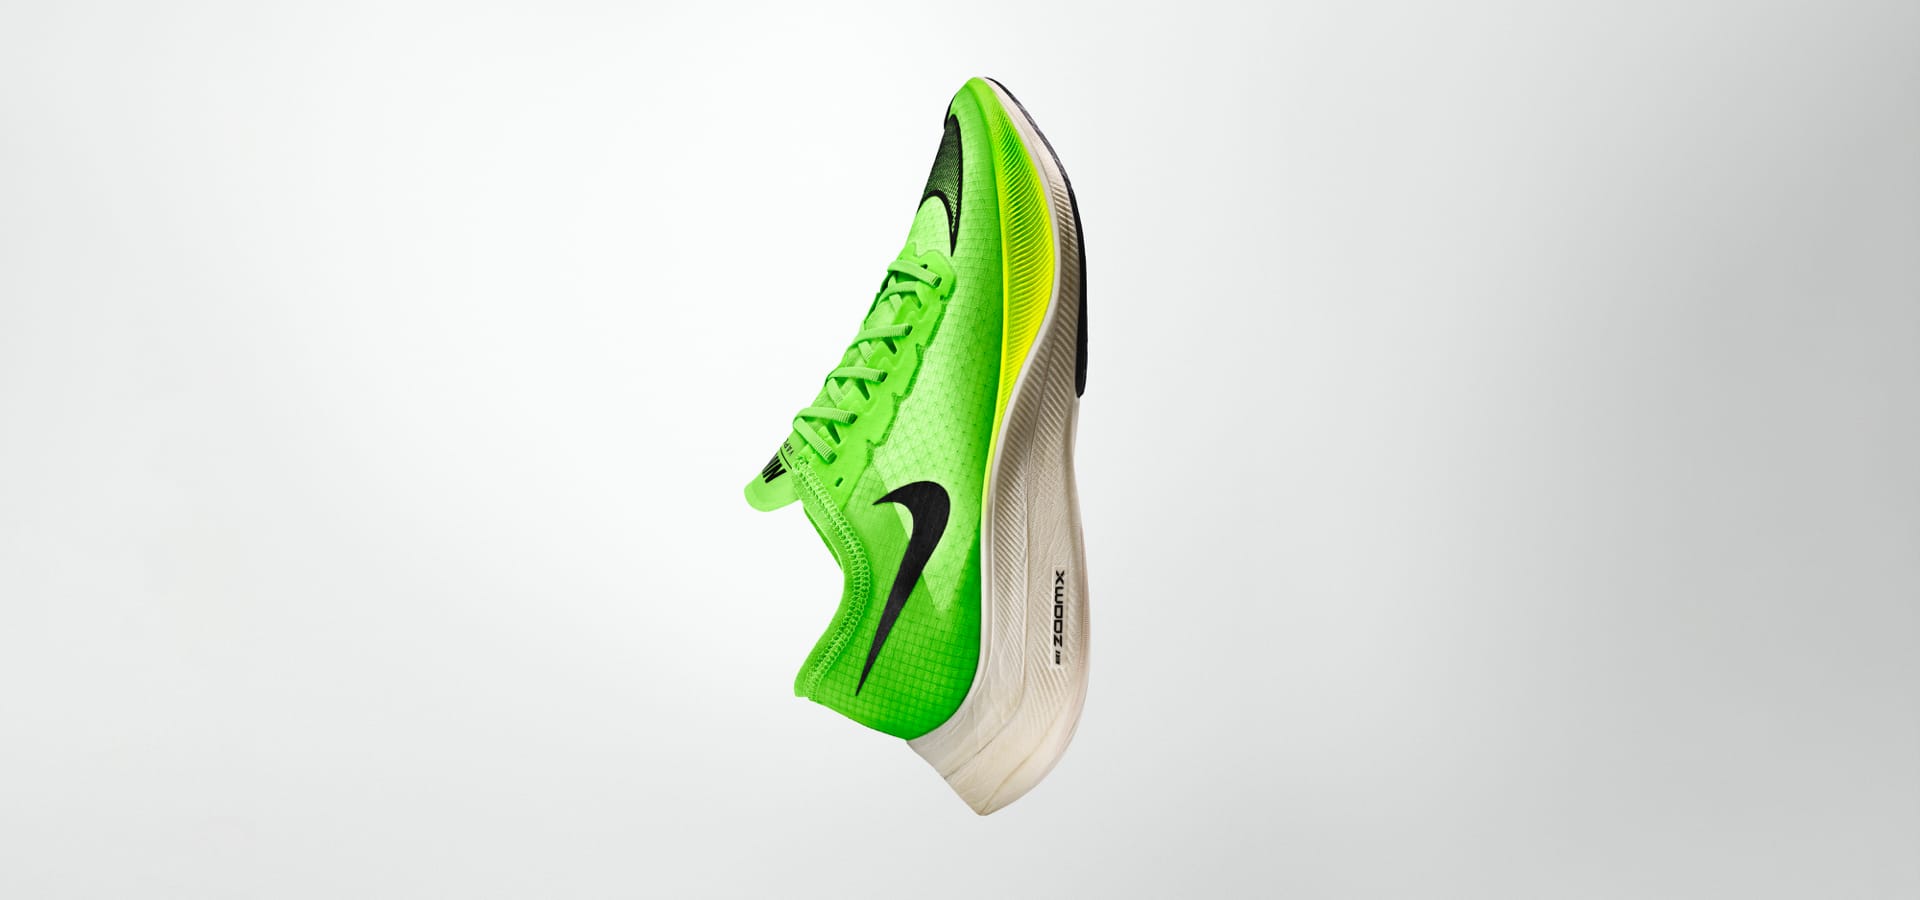 polet bord ulæselig Nike Vaporfly. Featuring the new Vaporfly NEXT%. Nike IN